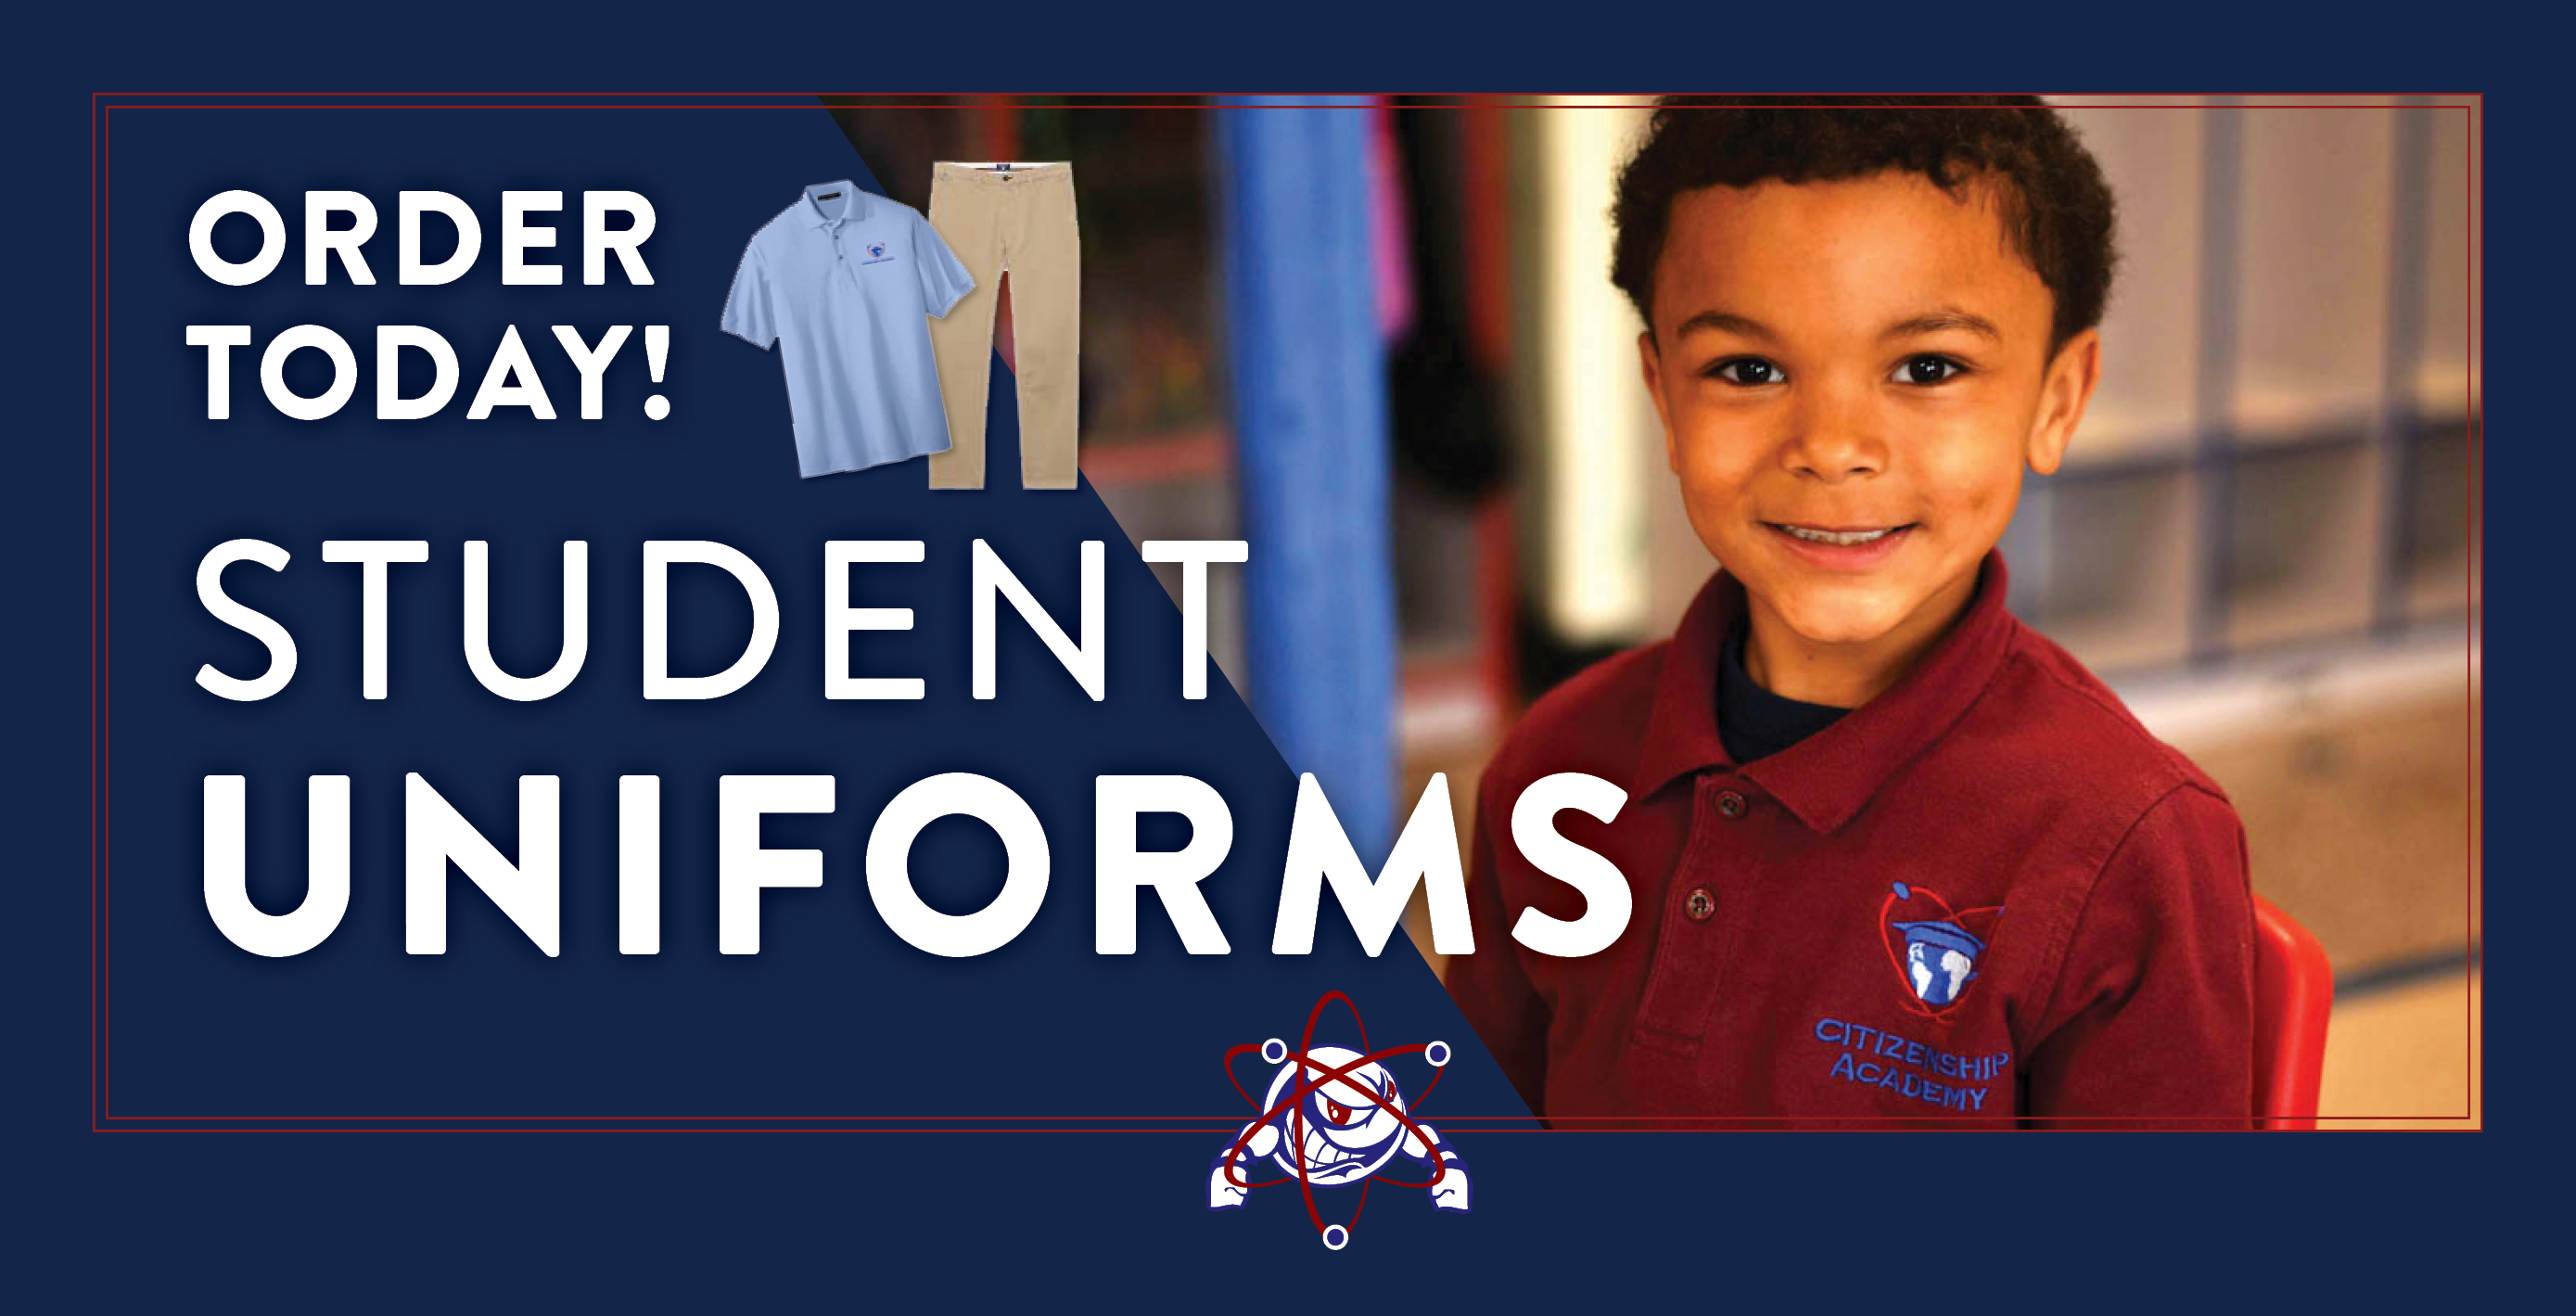 Syracuse Academy of Science and Citizenship elementary school reminds its families to order their student’s school uniform as soon as possible to ensure their Atom is ready for the first day of school. All school uniform orders must be placed online and will be shipped directly to your home.